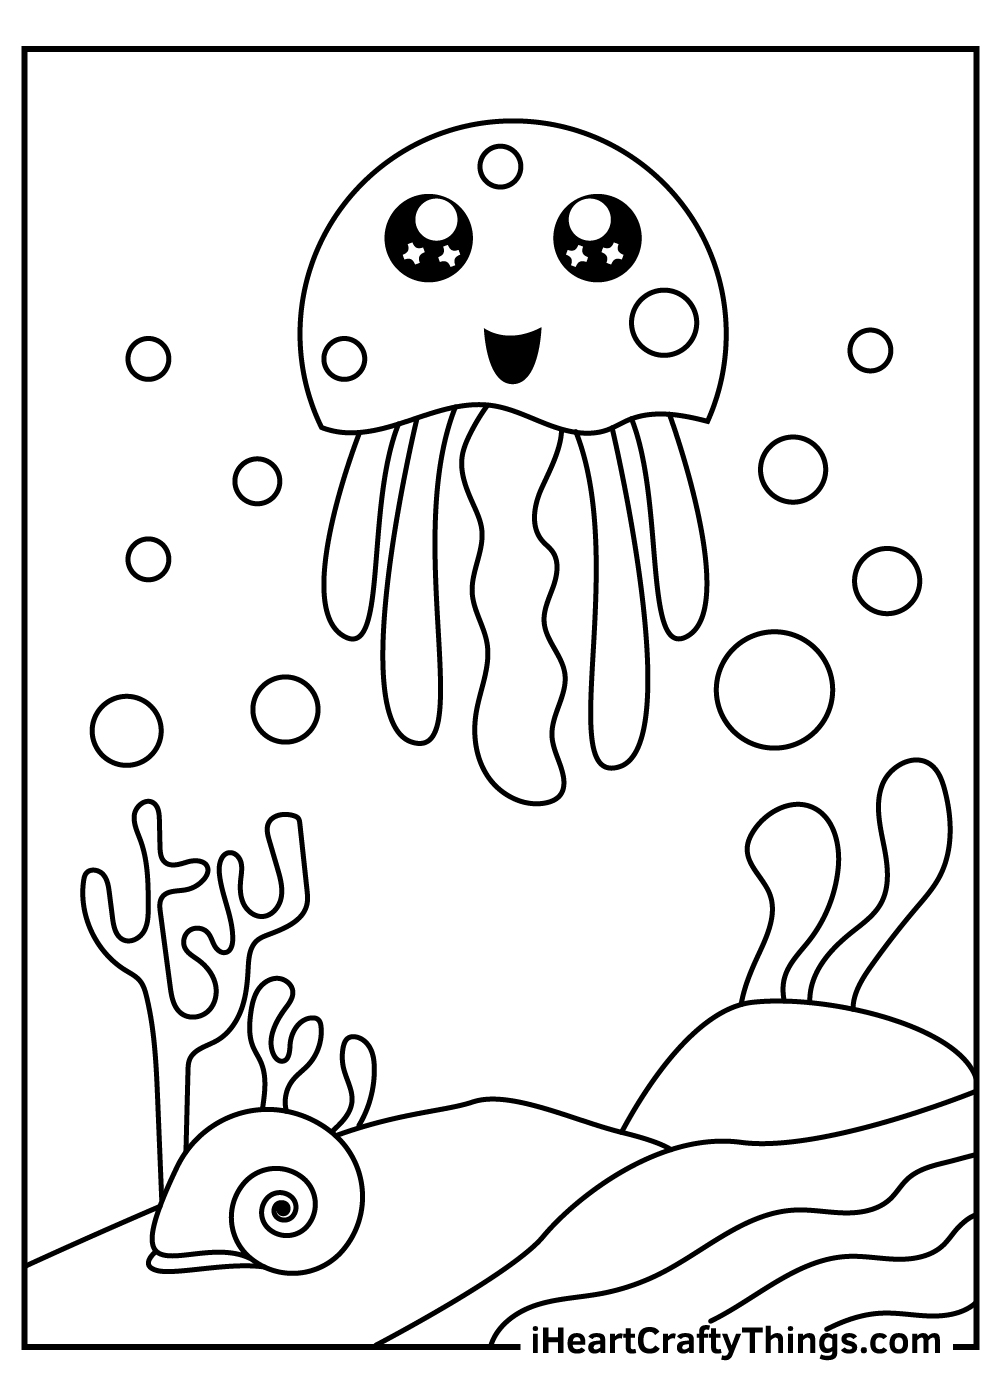 Jellyfish coloring pages free printables